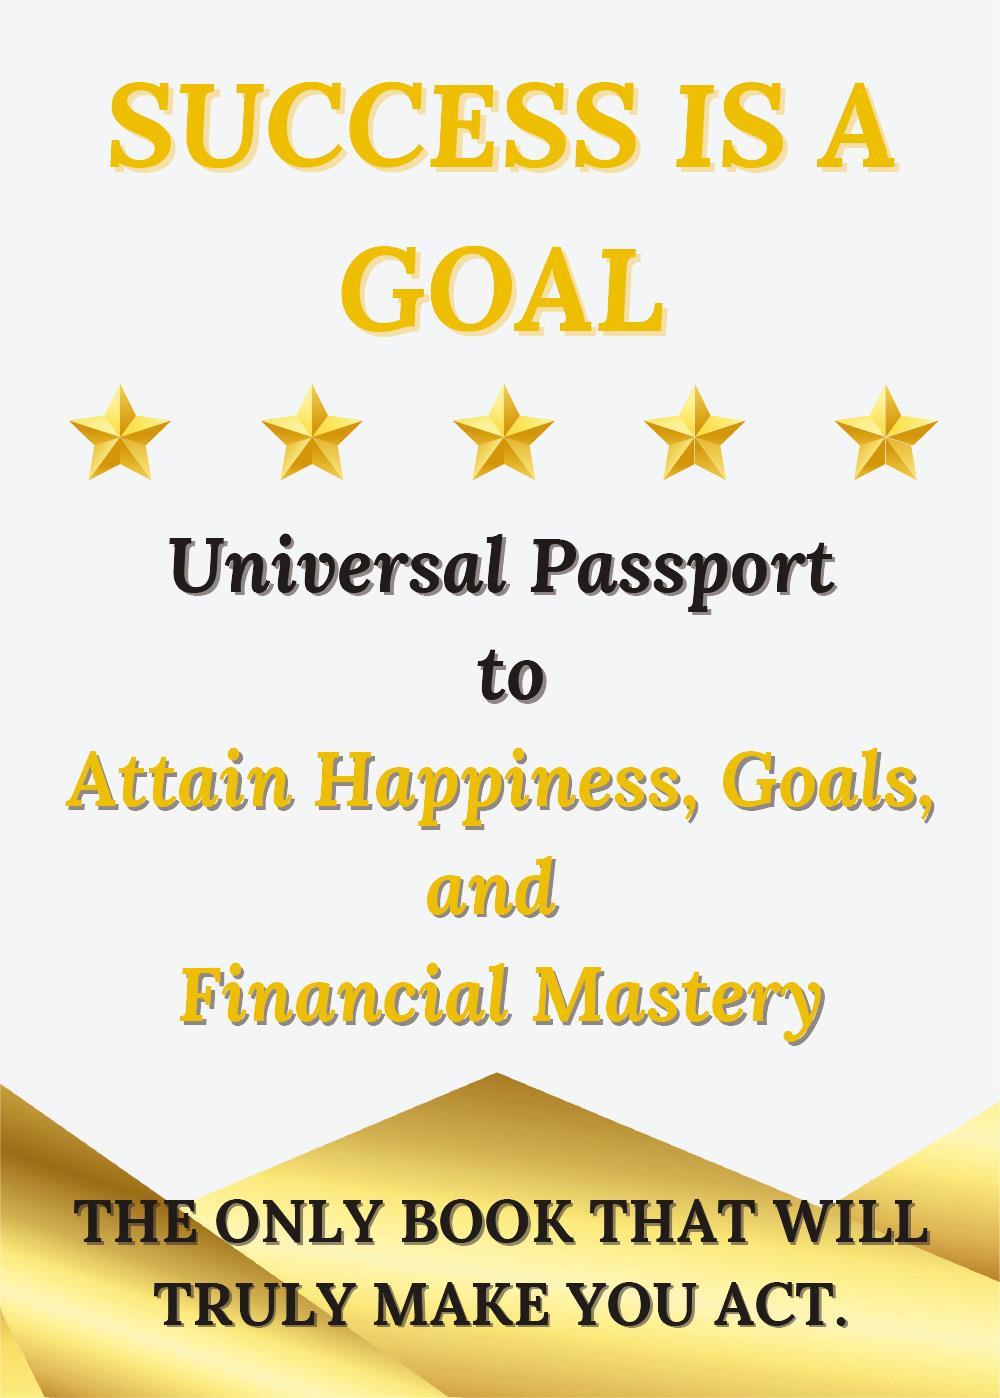 Success is a Goal - Universal Passport to Attain Happiness, Goals, and Financial Mastery